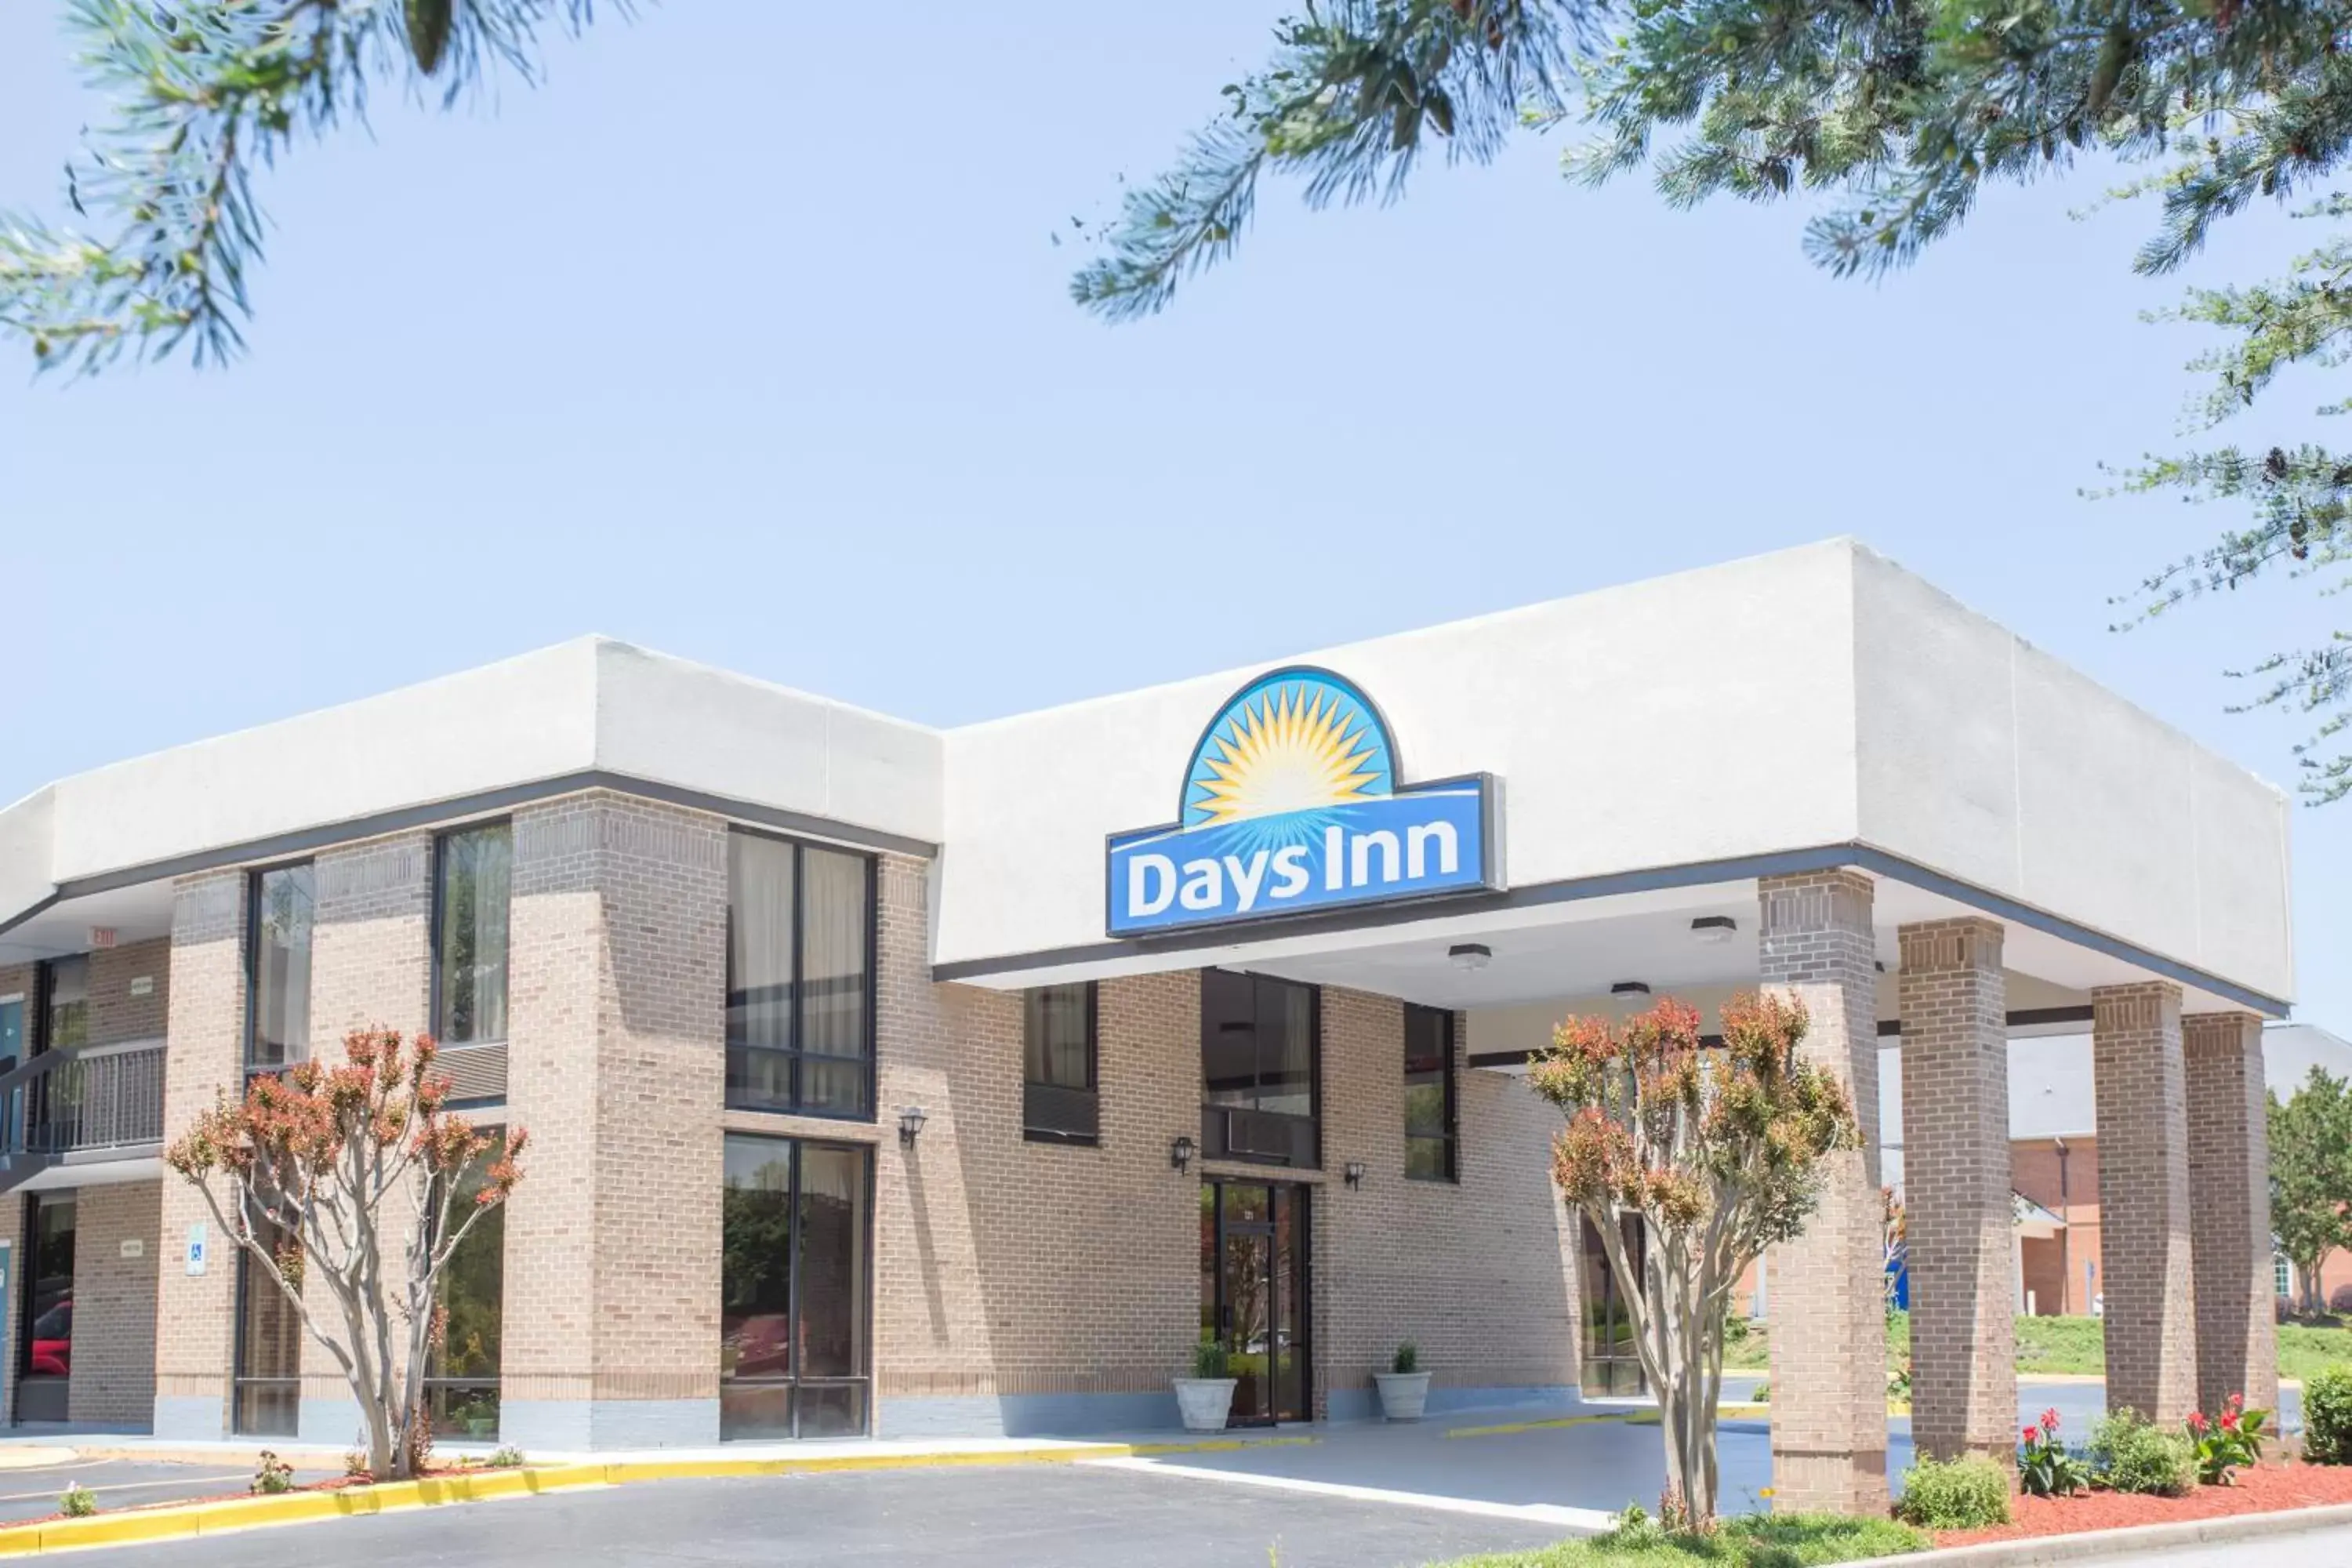 Property building, Facade/Entrance in Days Inn by Wyndham Easley West Of Greenville/Clemson Area